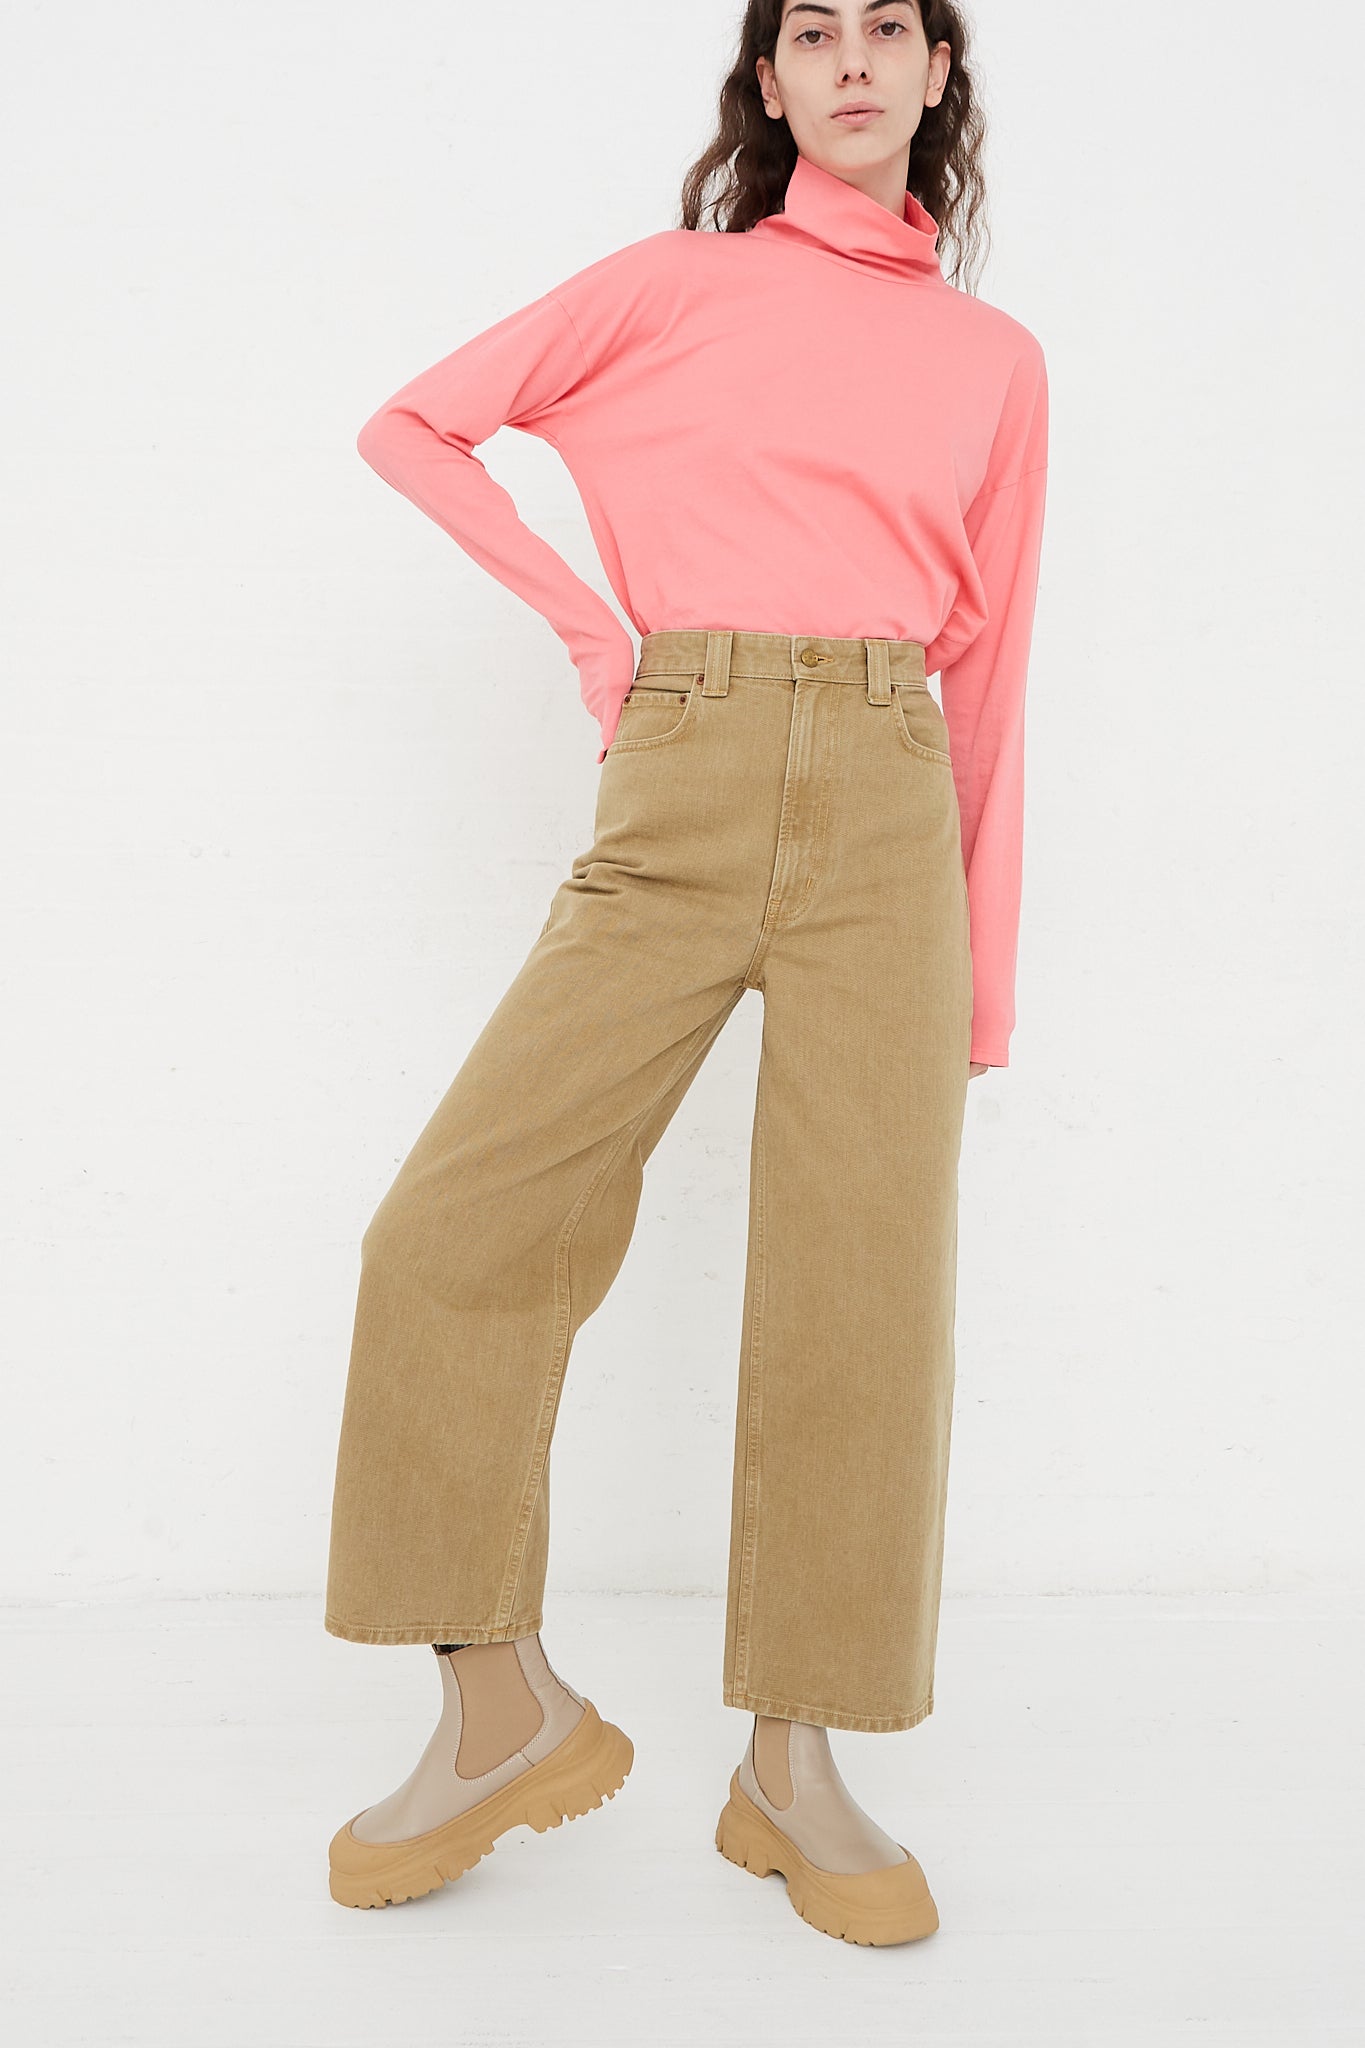 A model wearing a pink turtle neck top and tan corduroy pants for B Sides' Cotton Easy Jean Mid Relaxed in Stone Rinse.